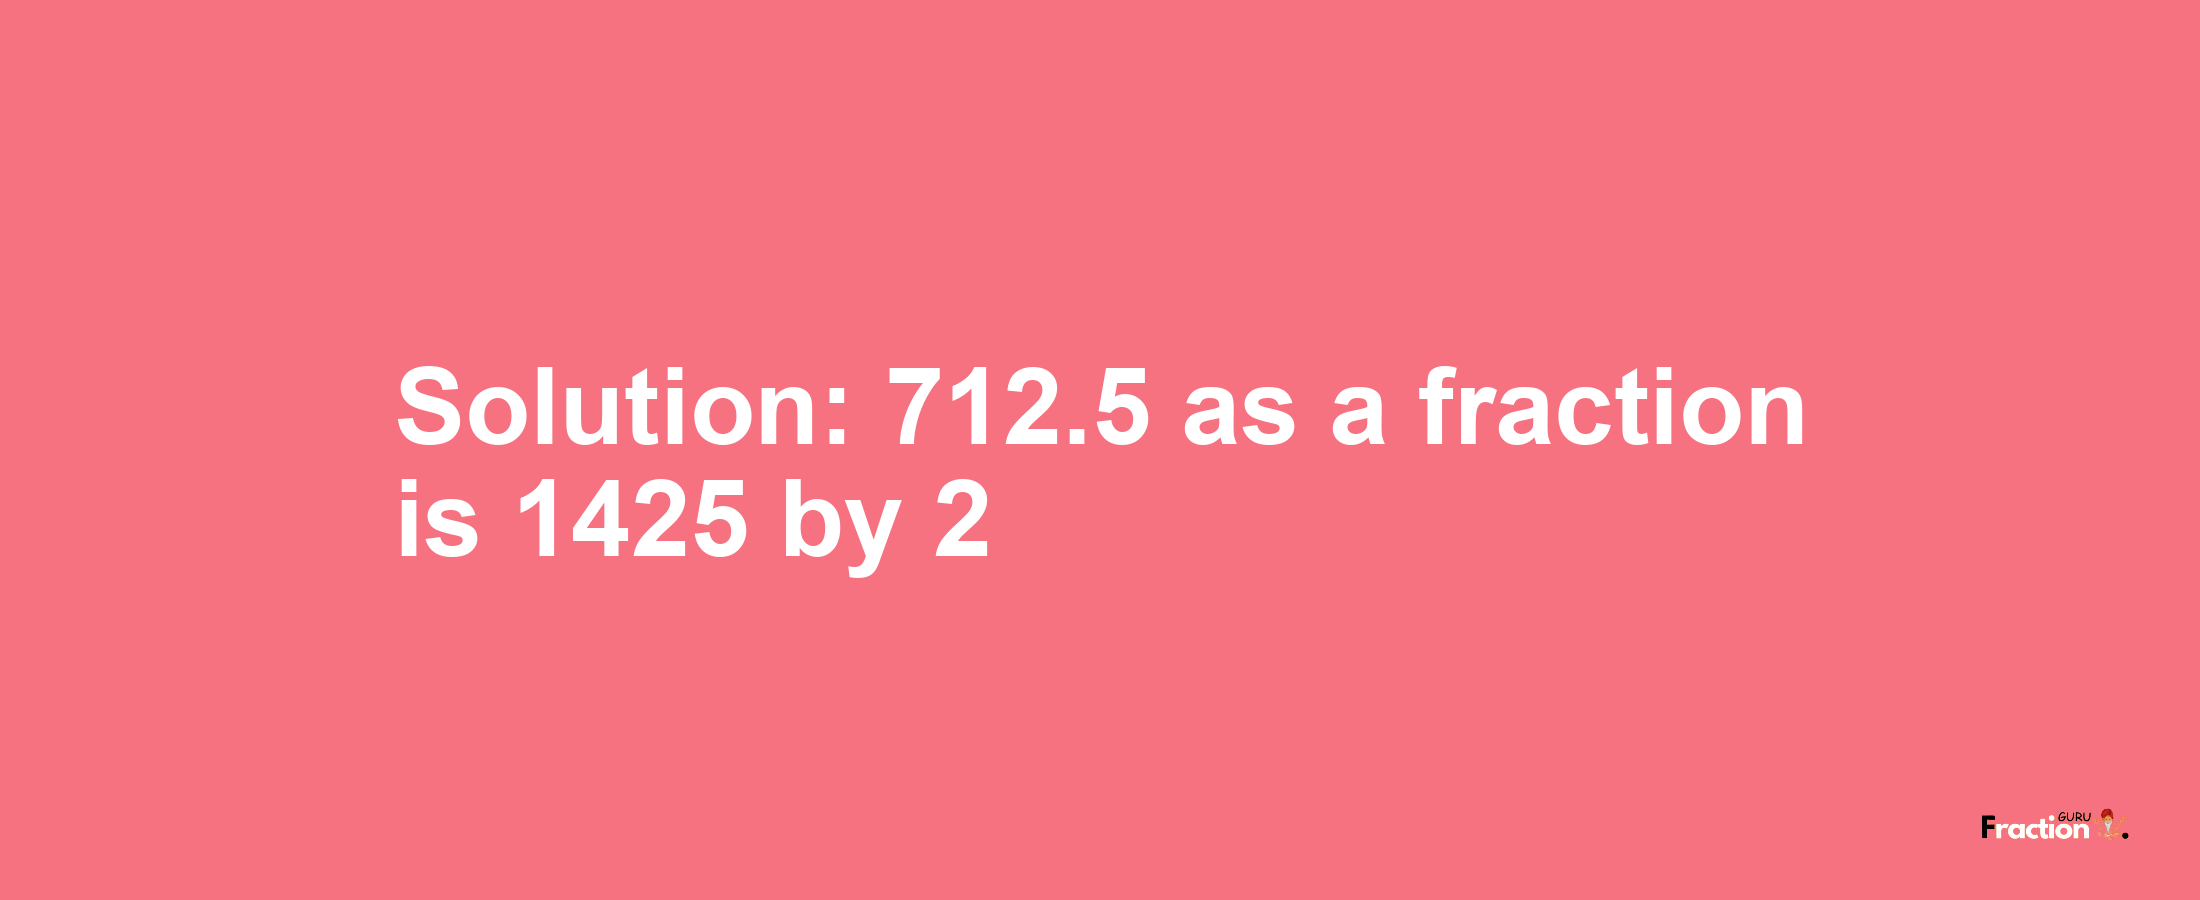 Solution:712.5 as a fraction is 1425/2